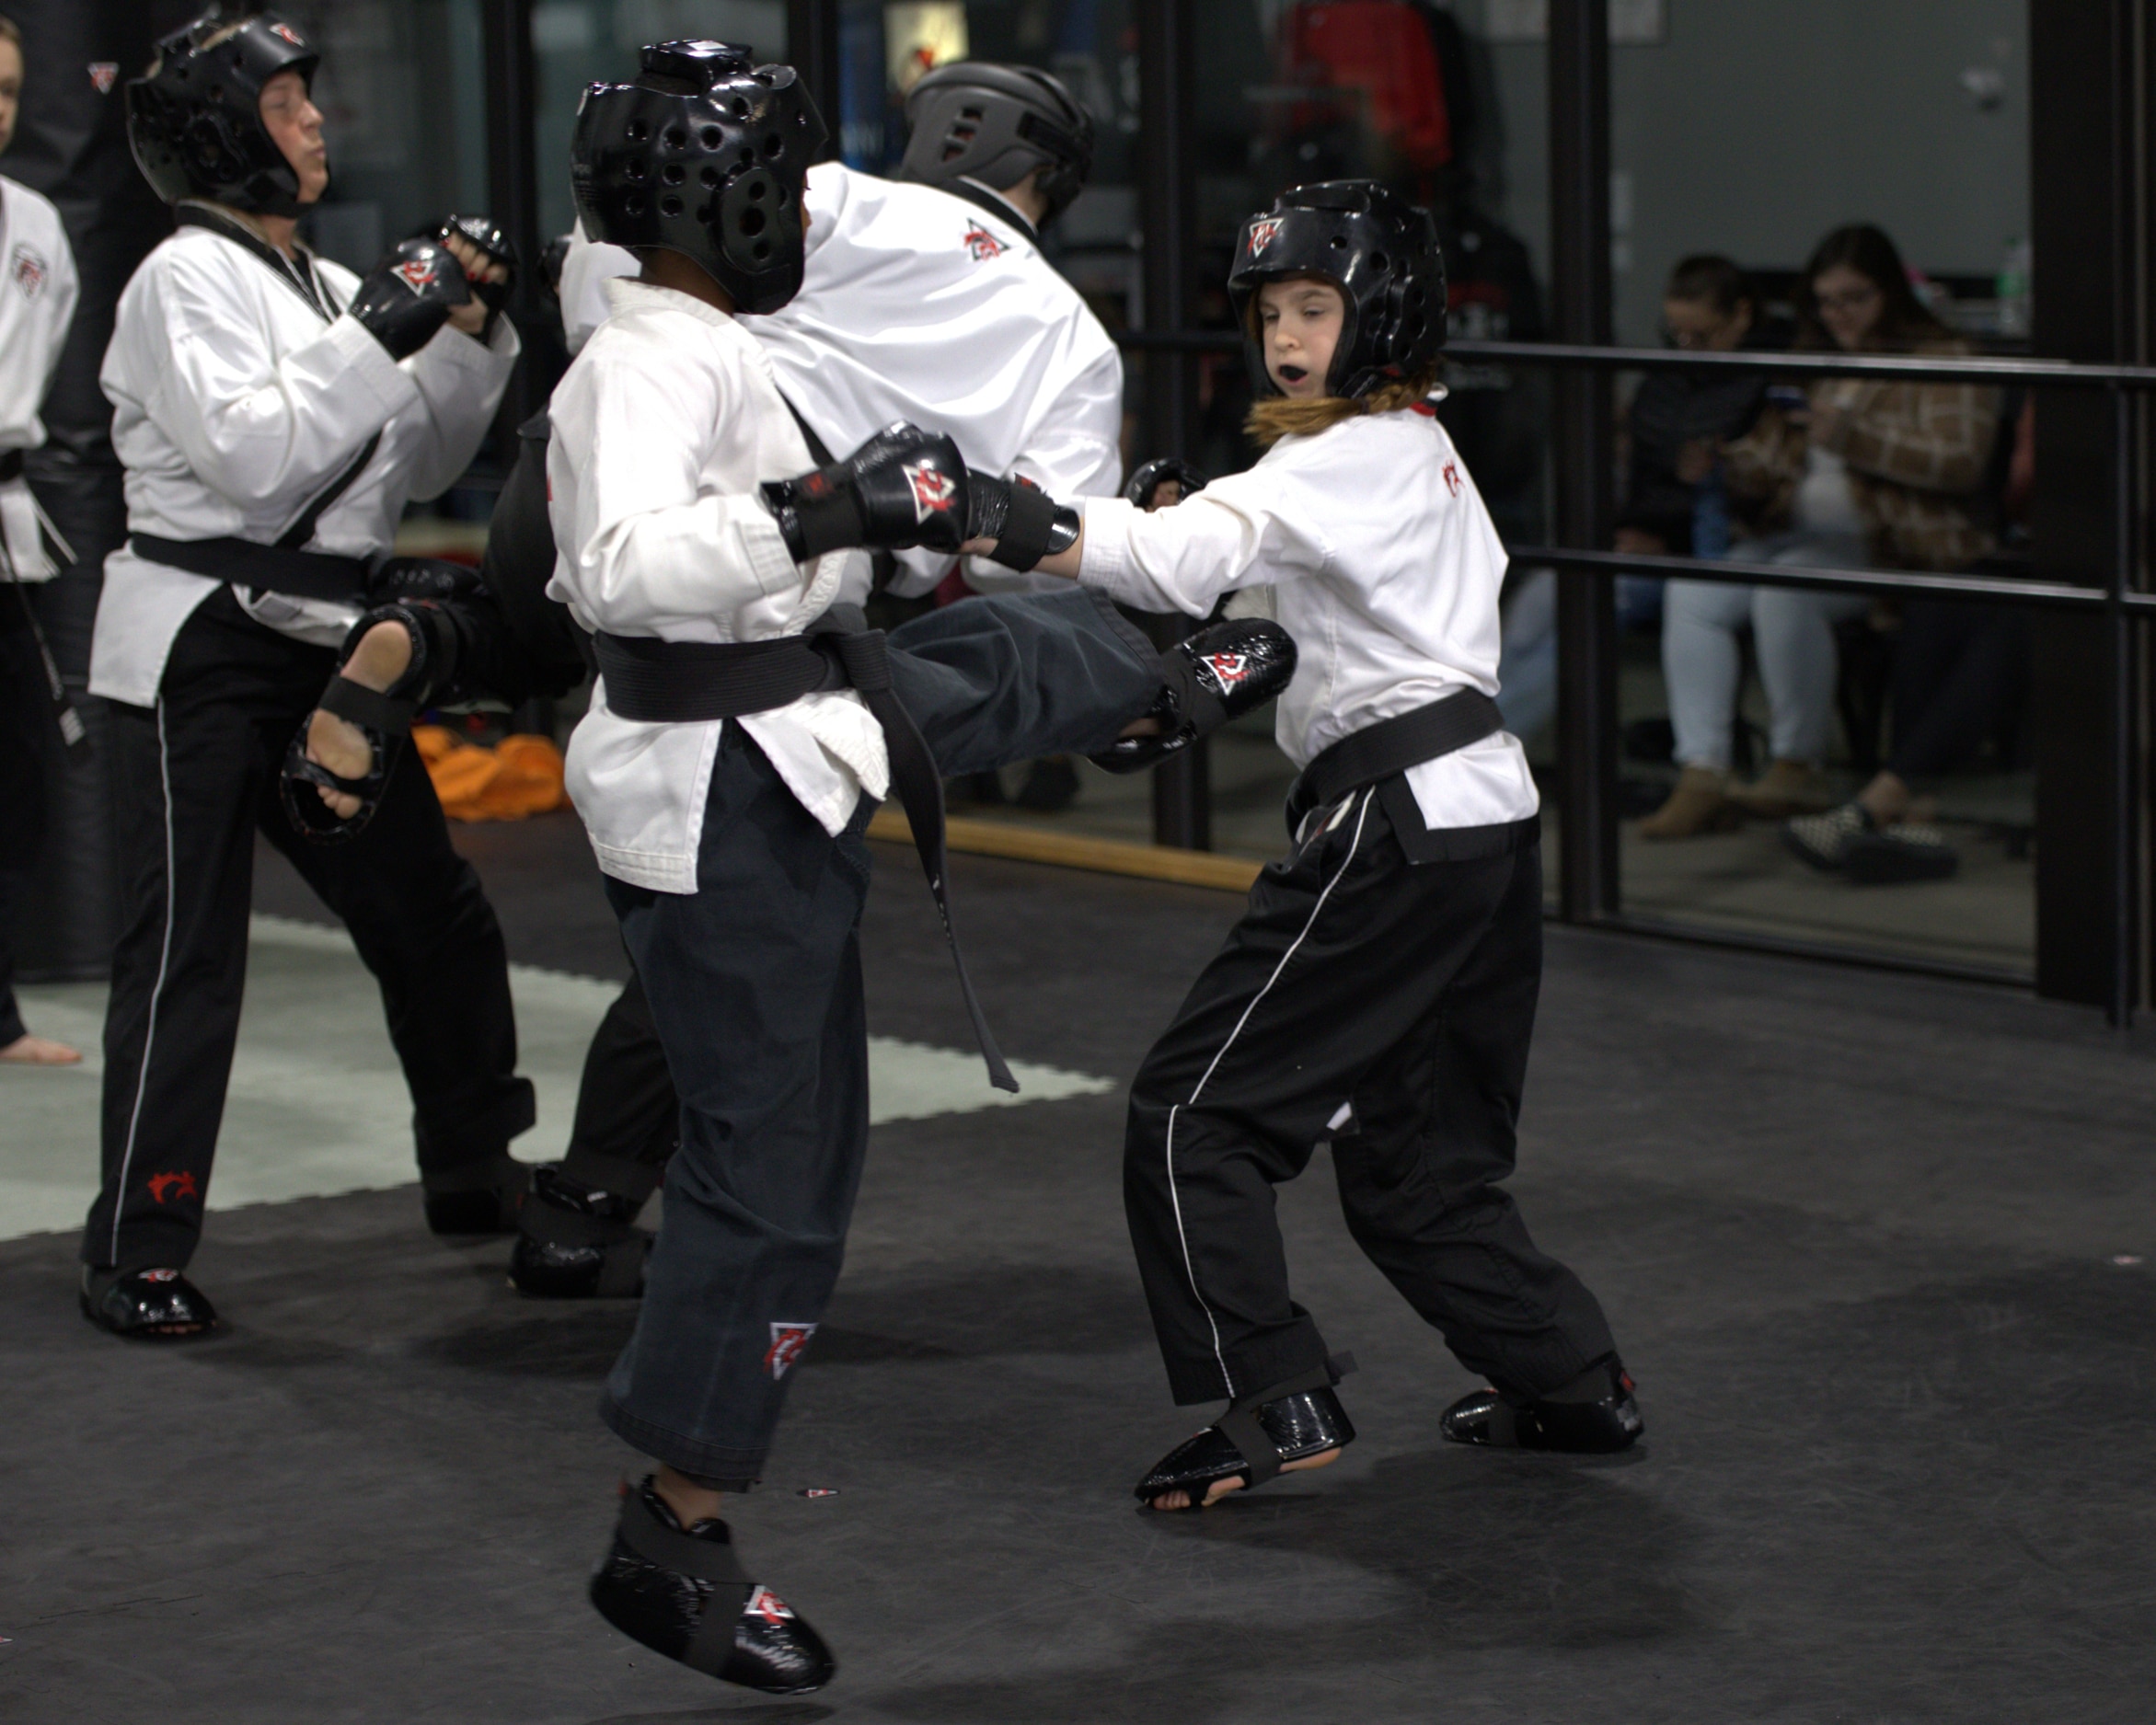 Greg Roy's Martial Arts Academy Special Offers